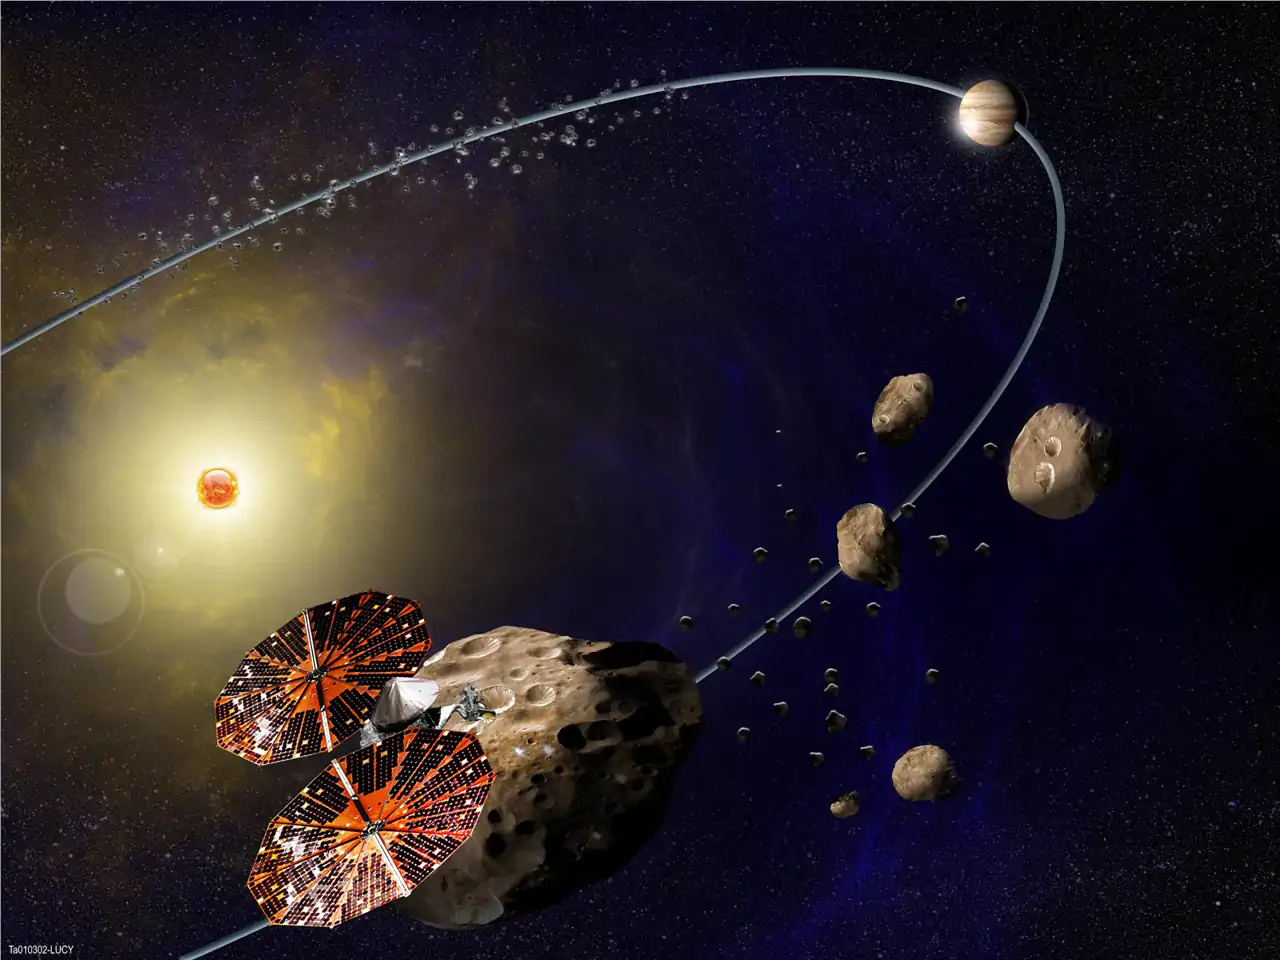 We Asked a NASA Scientist: What Are the Trojan Asteroids? [Video]